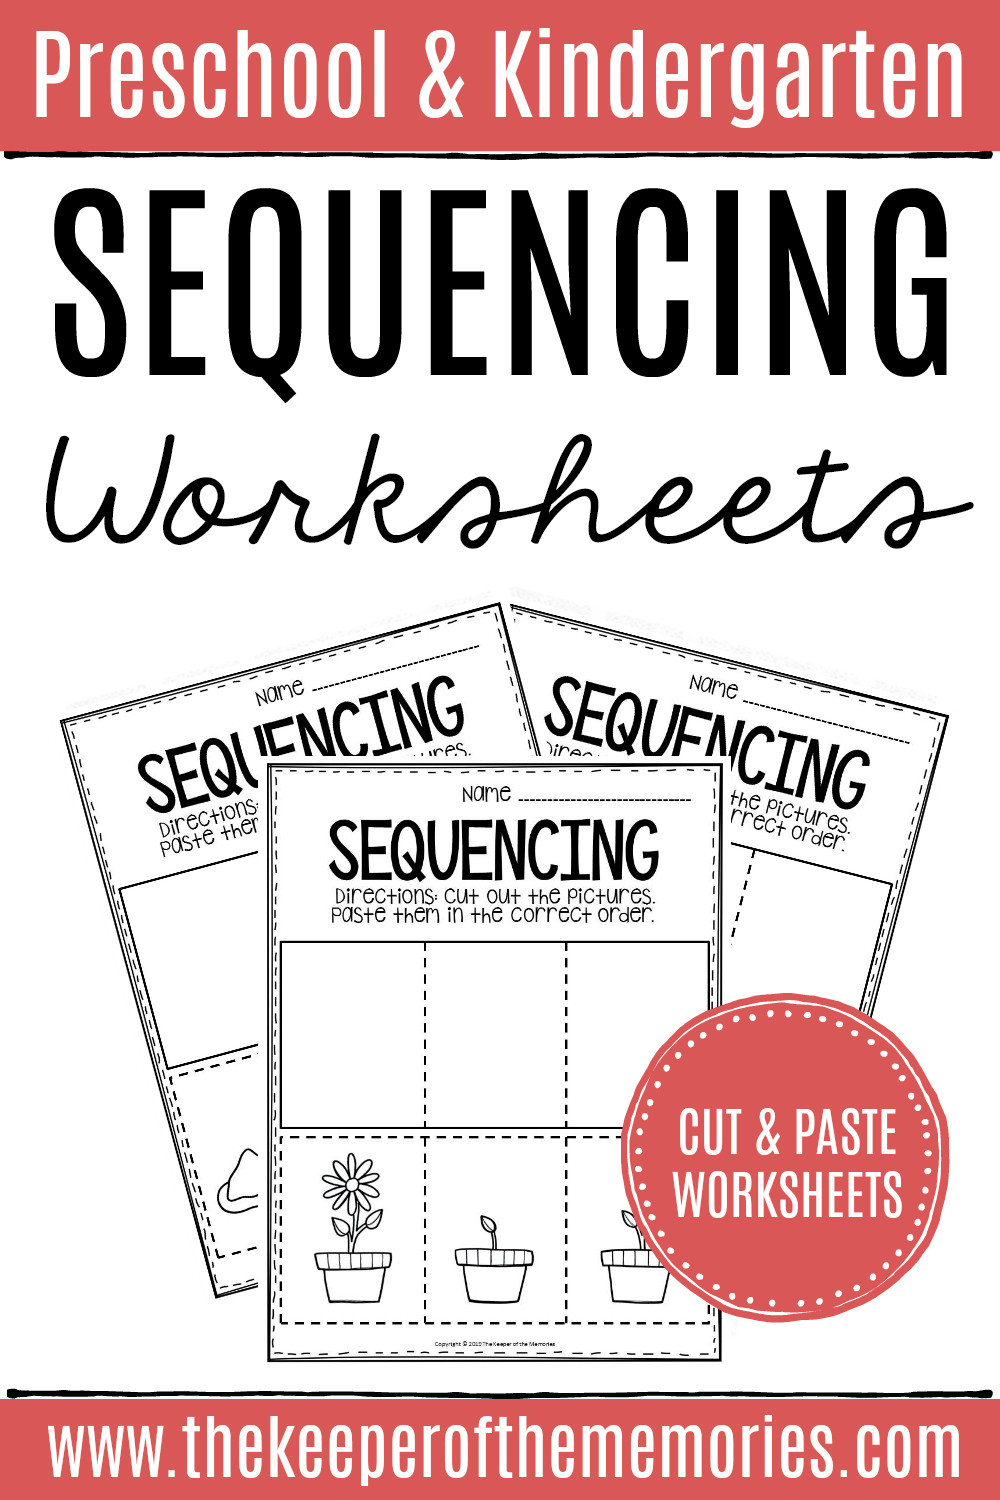 Preschool Sequencing Worksheets 3 Step Sequencing Worksheets the Keeper Of the Memories